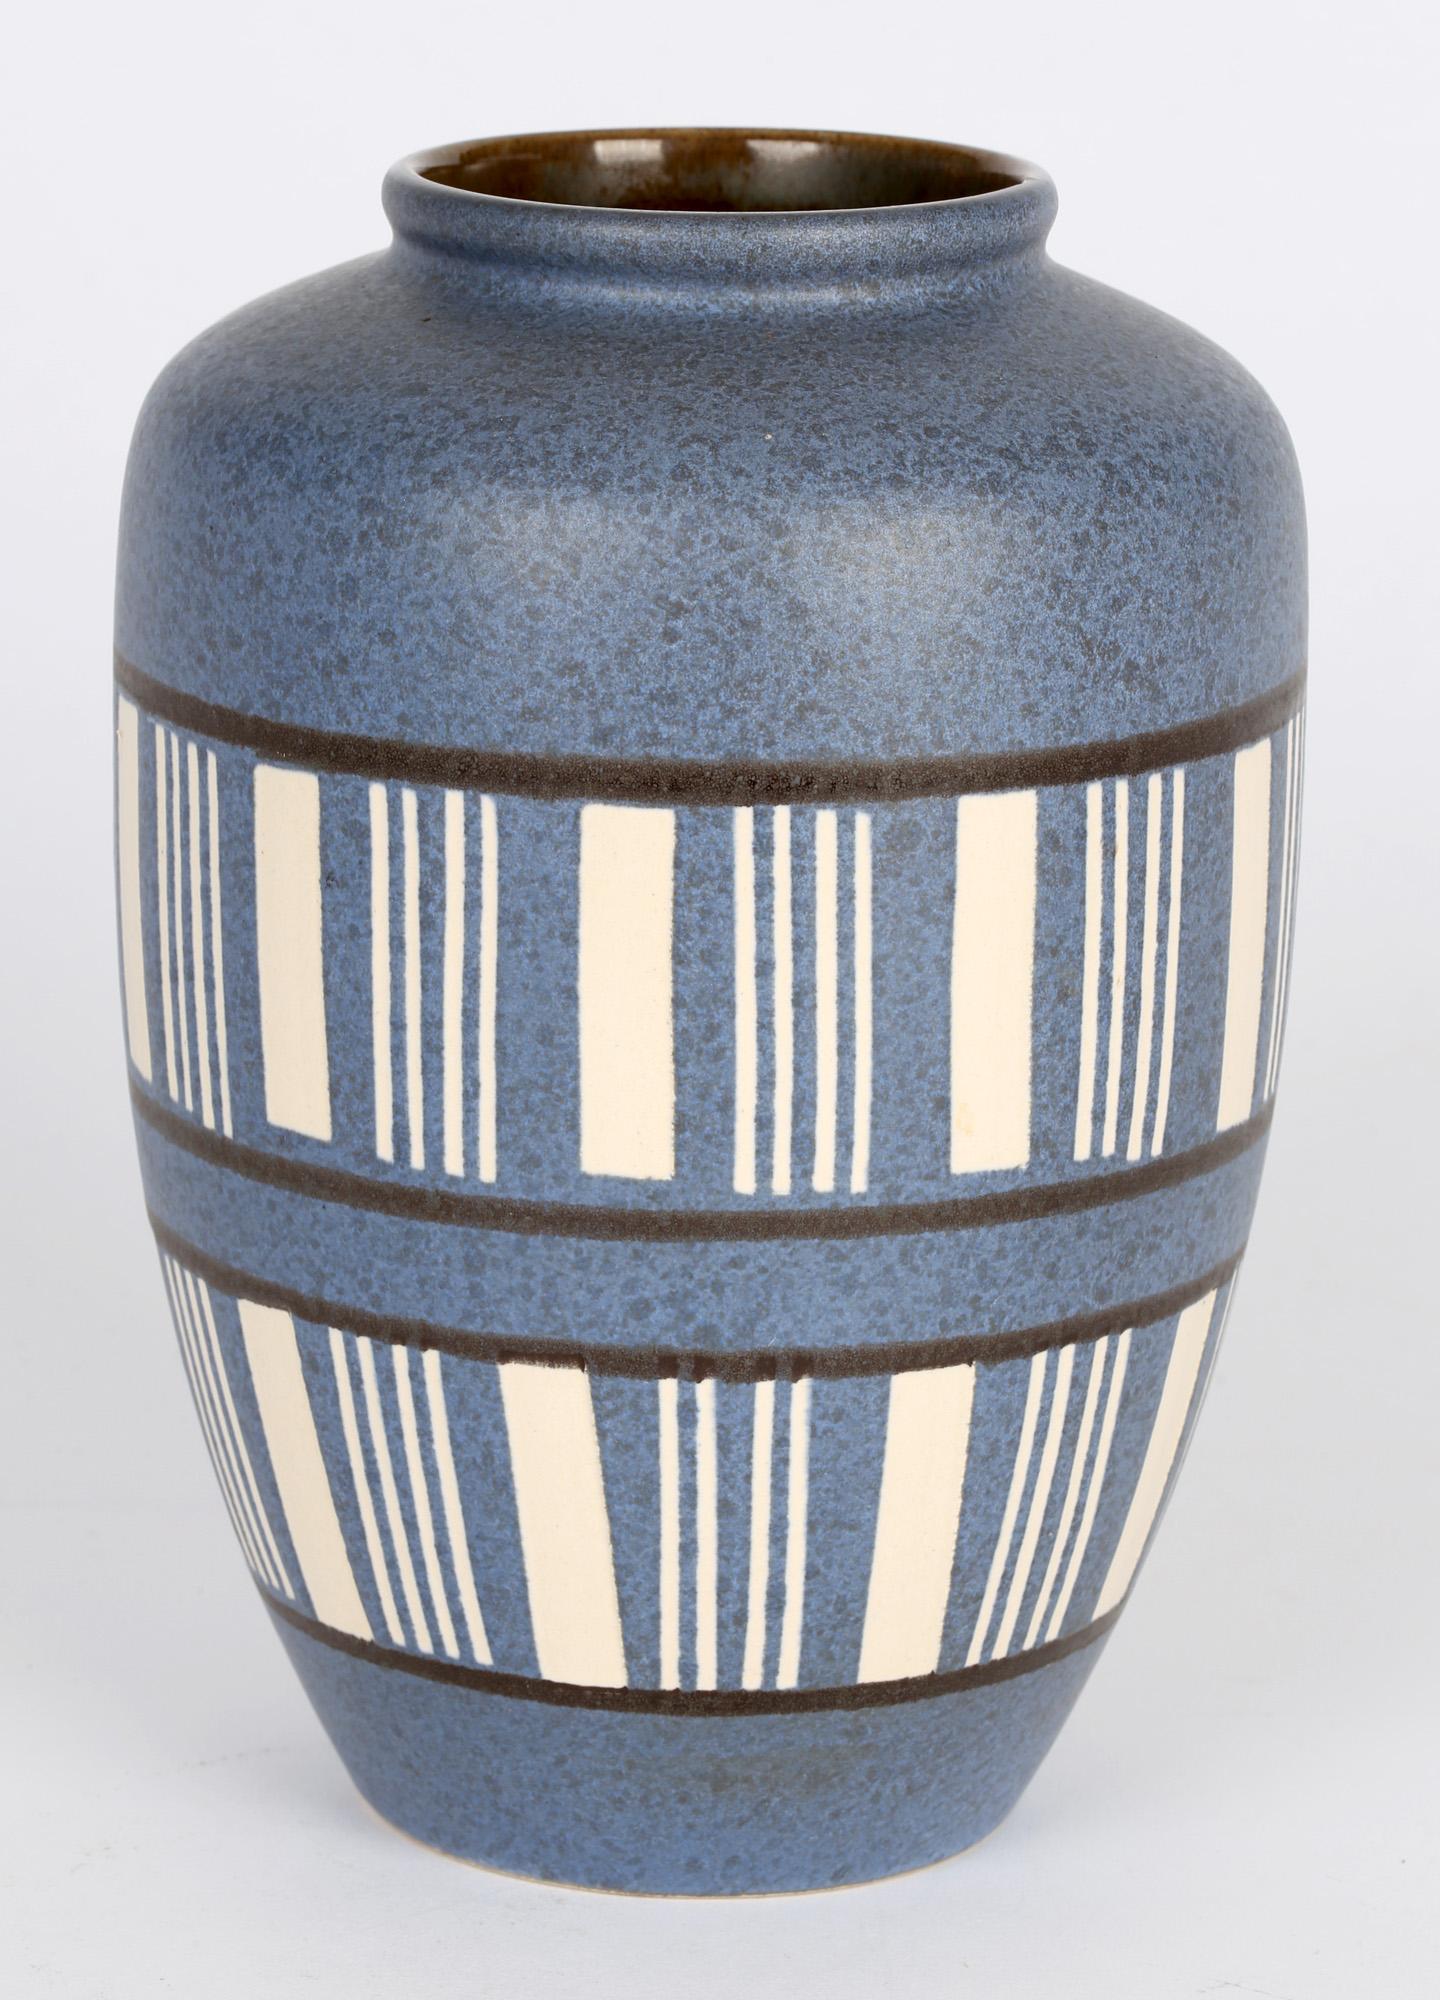 An exceptional quality West German mid-century art pottery vase decorated with a blue and white linear design possibly by Scheurich and dating around 1960. The finely potted vase is of rounded bulbous shape standing on a narrow rounded foot with a